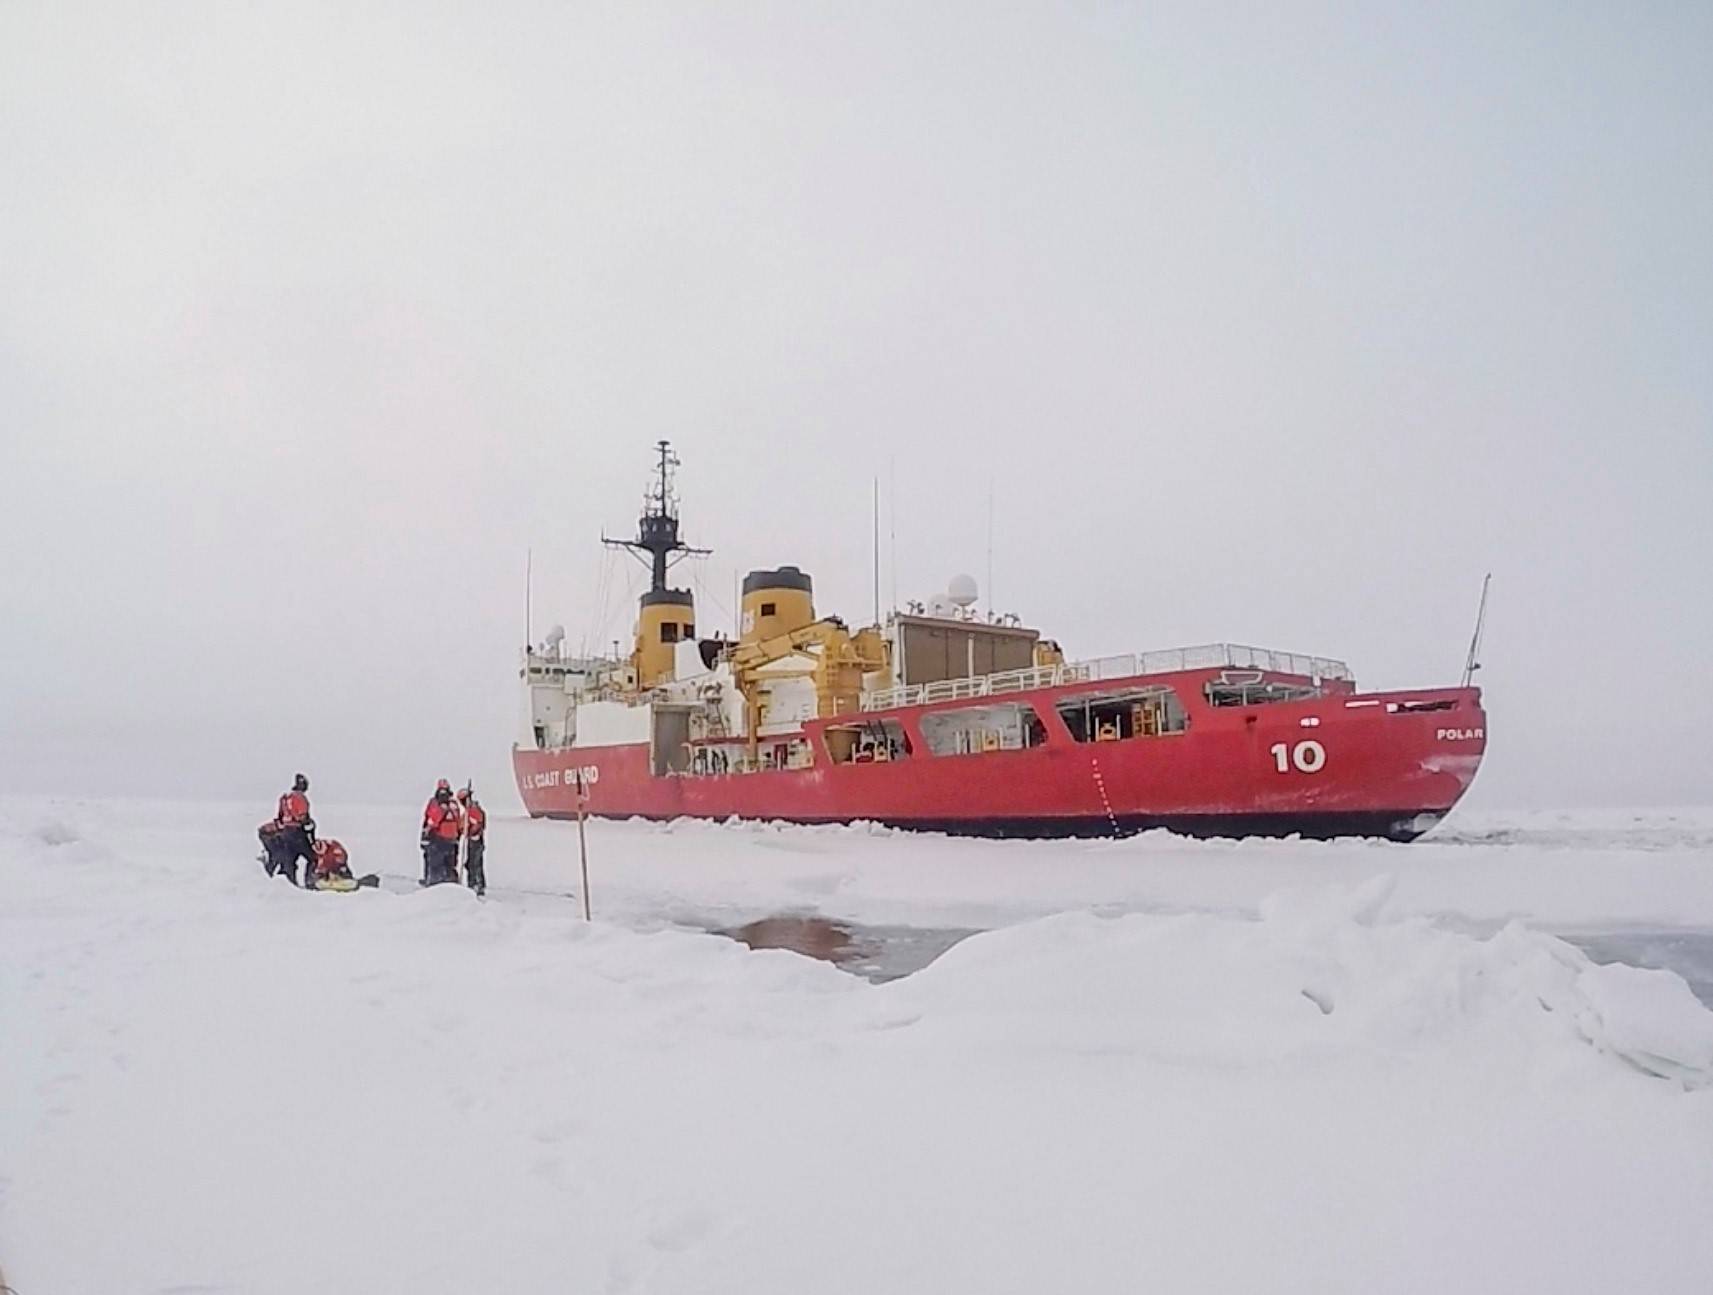 Coast Guard Cutter Polar Star crewmembers participate in ice rescue training in the Bering Strait on Jan. 28, 2021. (Petty Officer 1st Class Cynthia Oldham / U.S. Coast Guard)